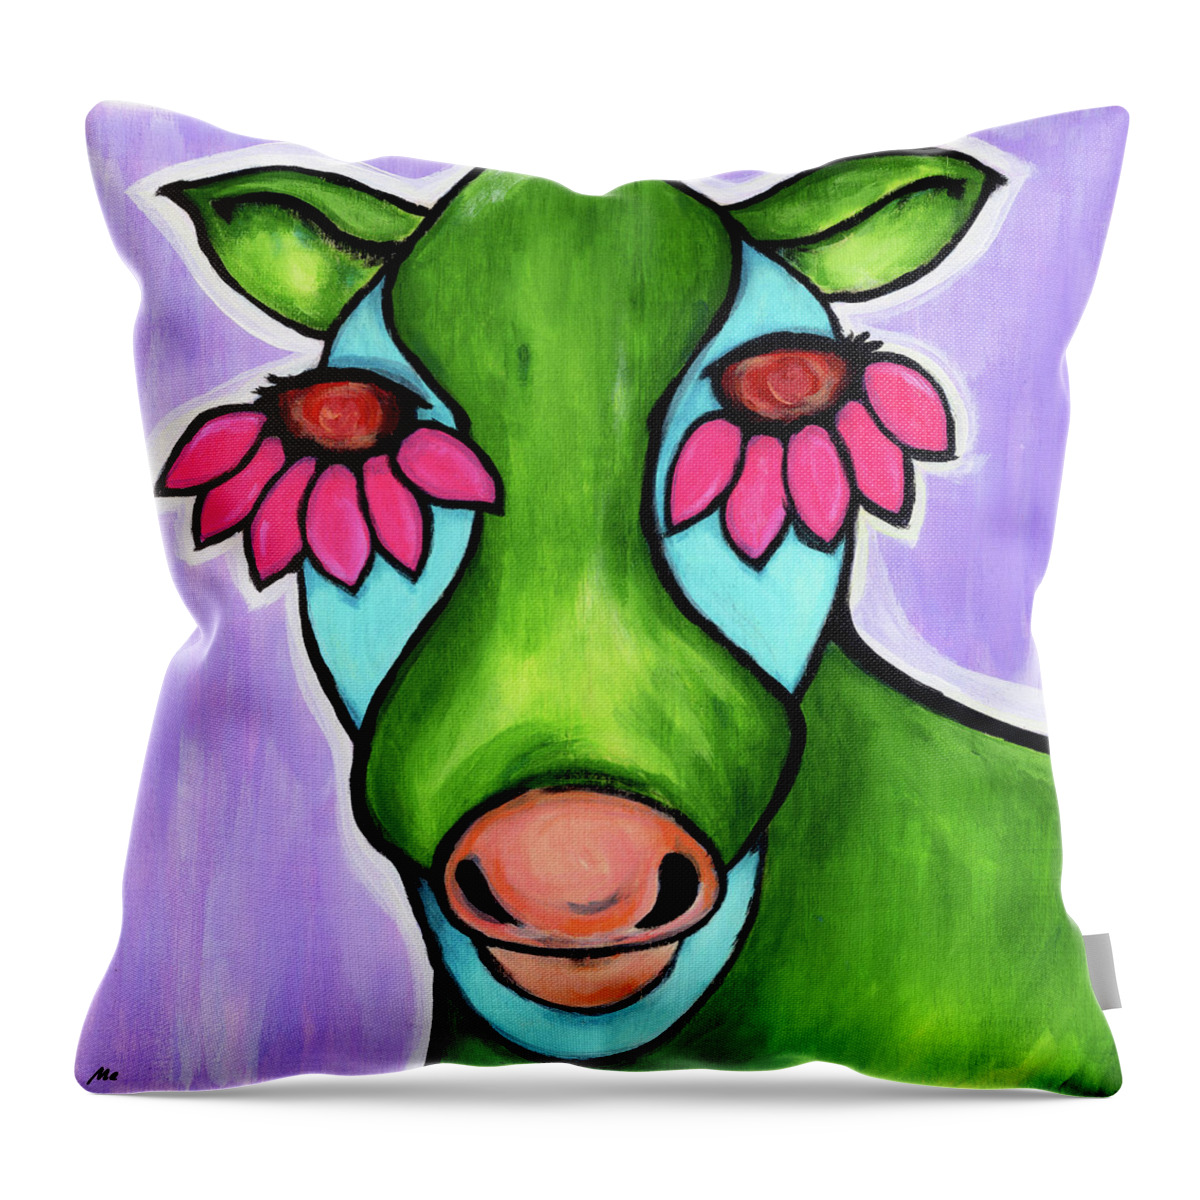 Cow Throw Pillow featuring the painting Broccoli The Cow by Meghan Elizabeth